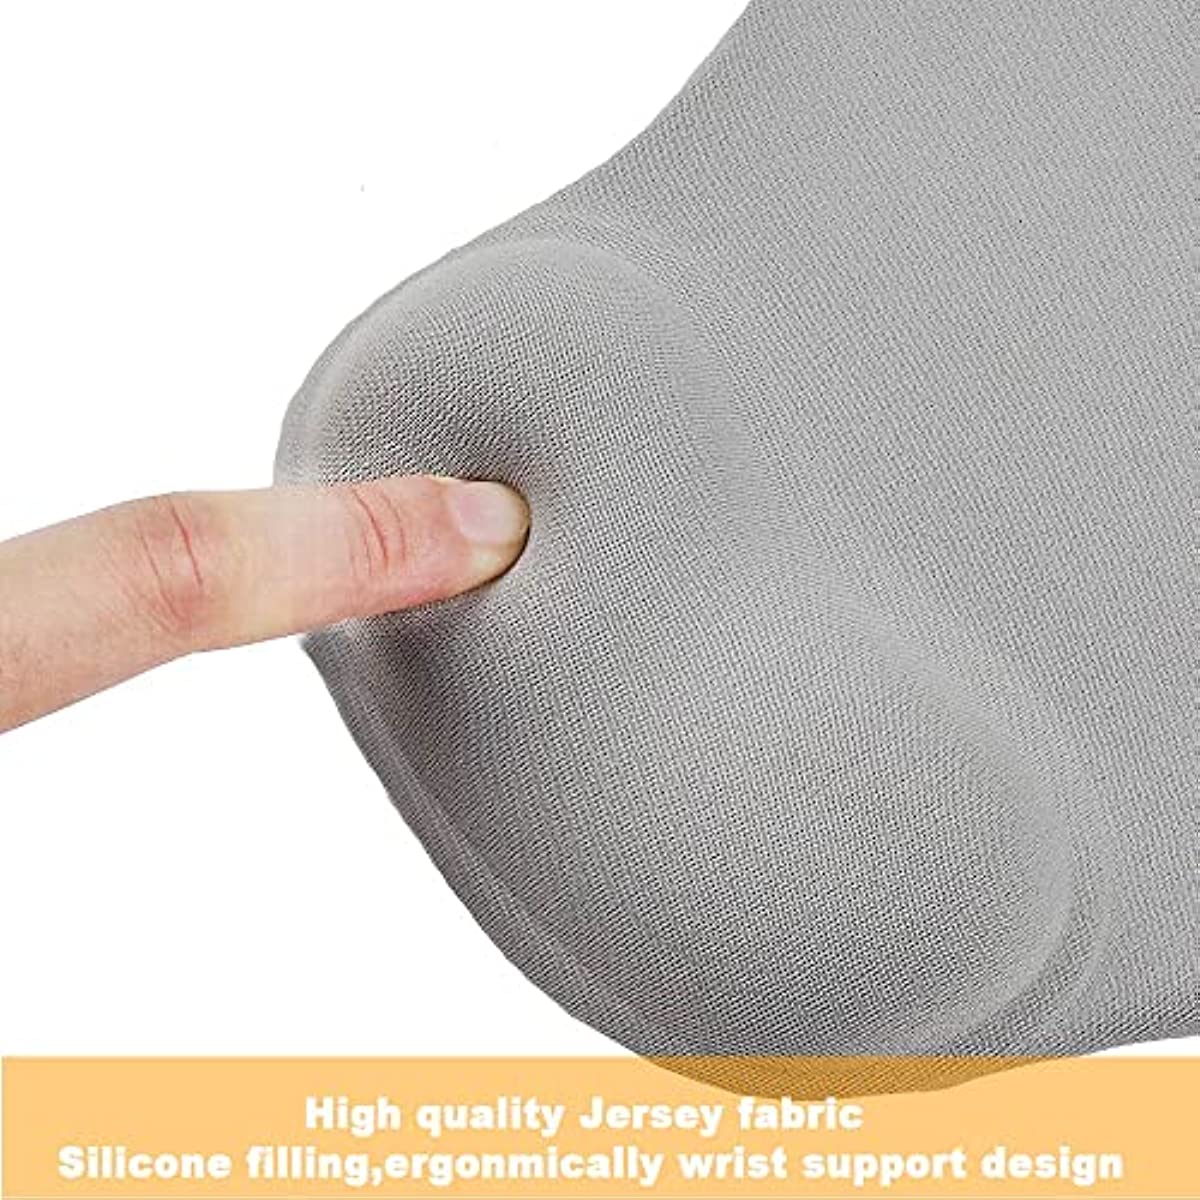 Office Mousepad with Gel Wrist Support - Design Gamepad Mat Rubber Base for Laptop Computer